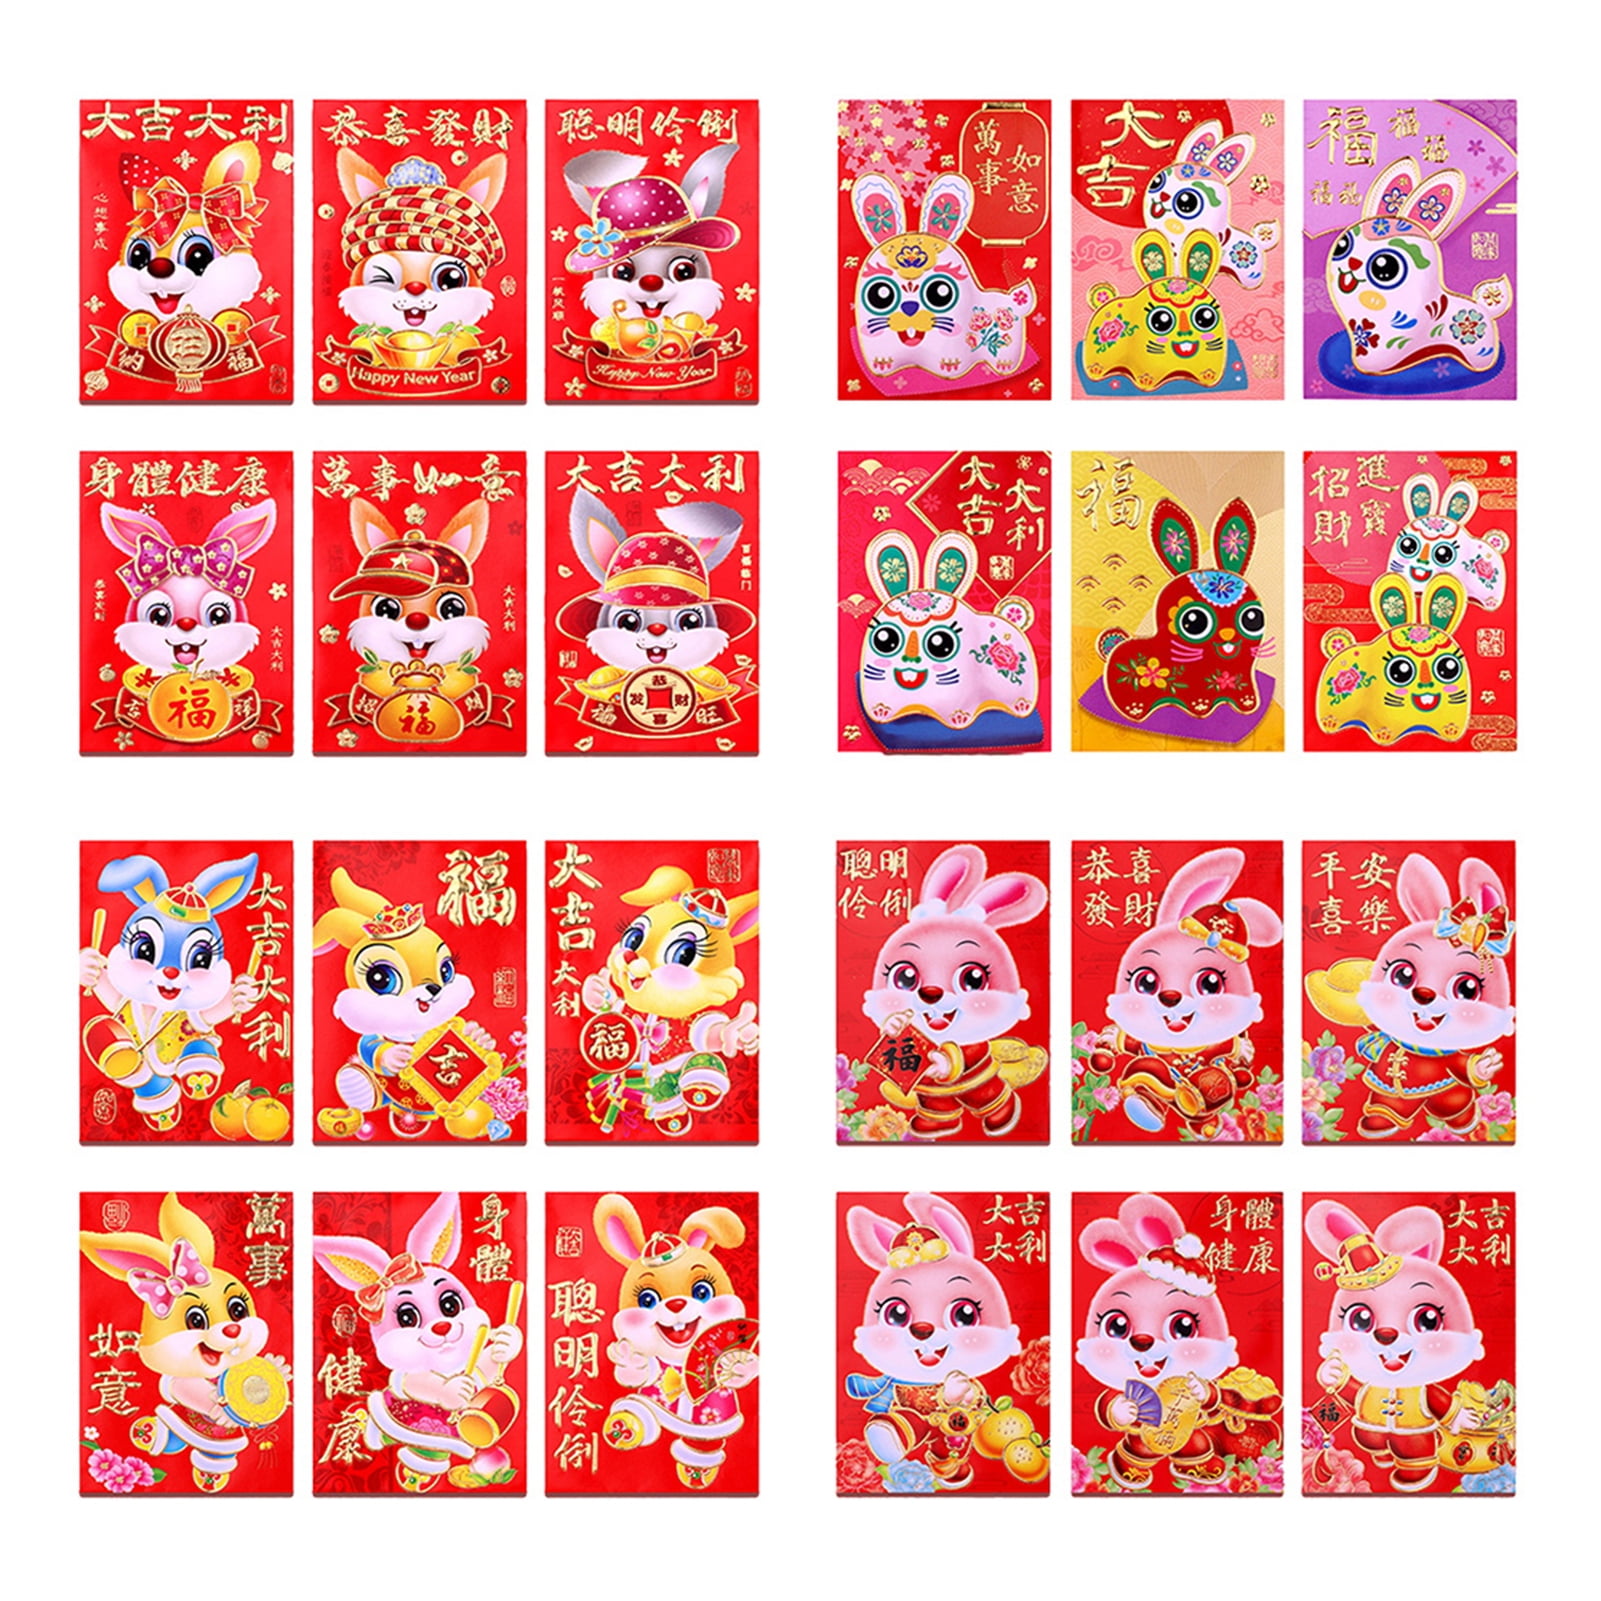 6pcs Happy Birthday Red Envelope Hot Stamping Creative Red Pocket